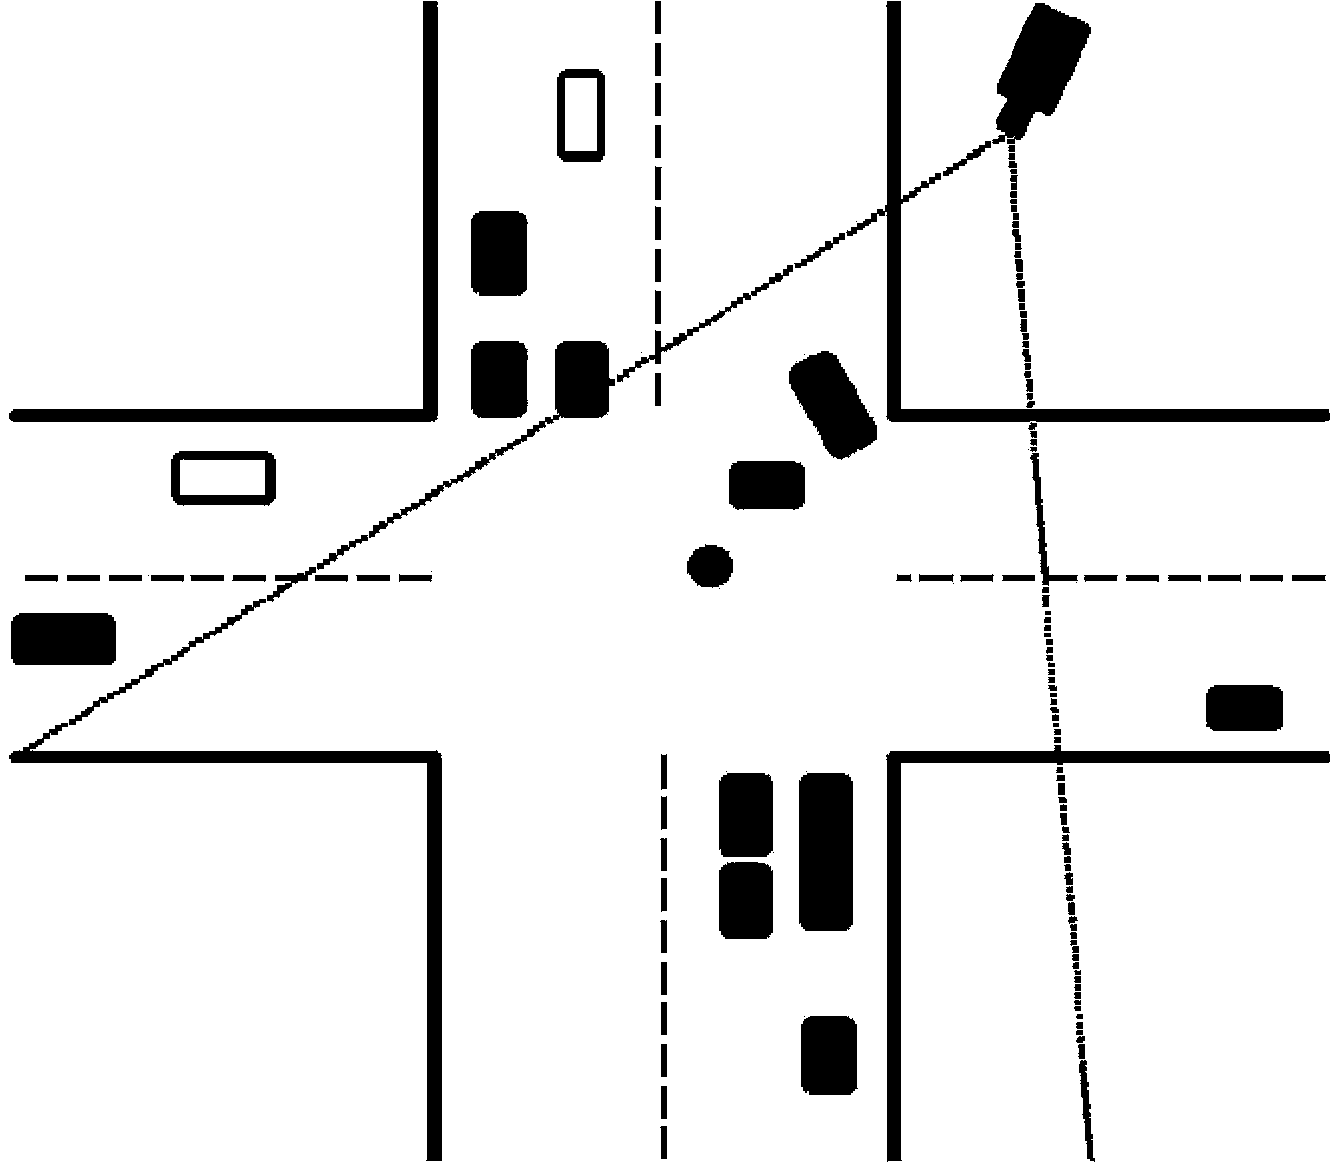 Video image foreground detection method for traffic intersection scene and based on network physical system